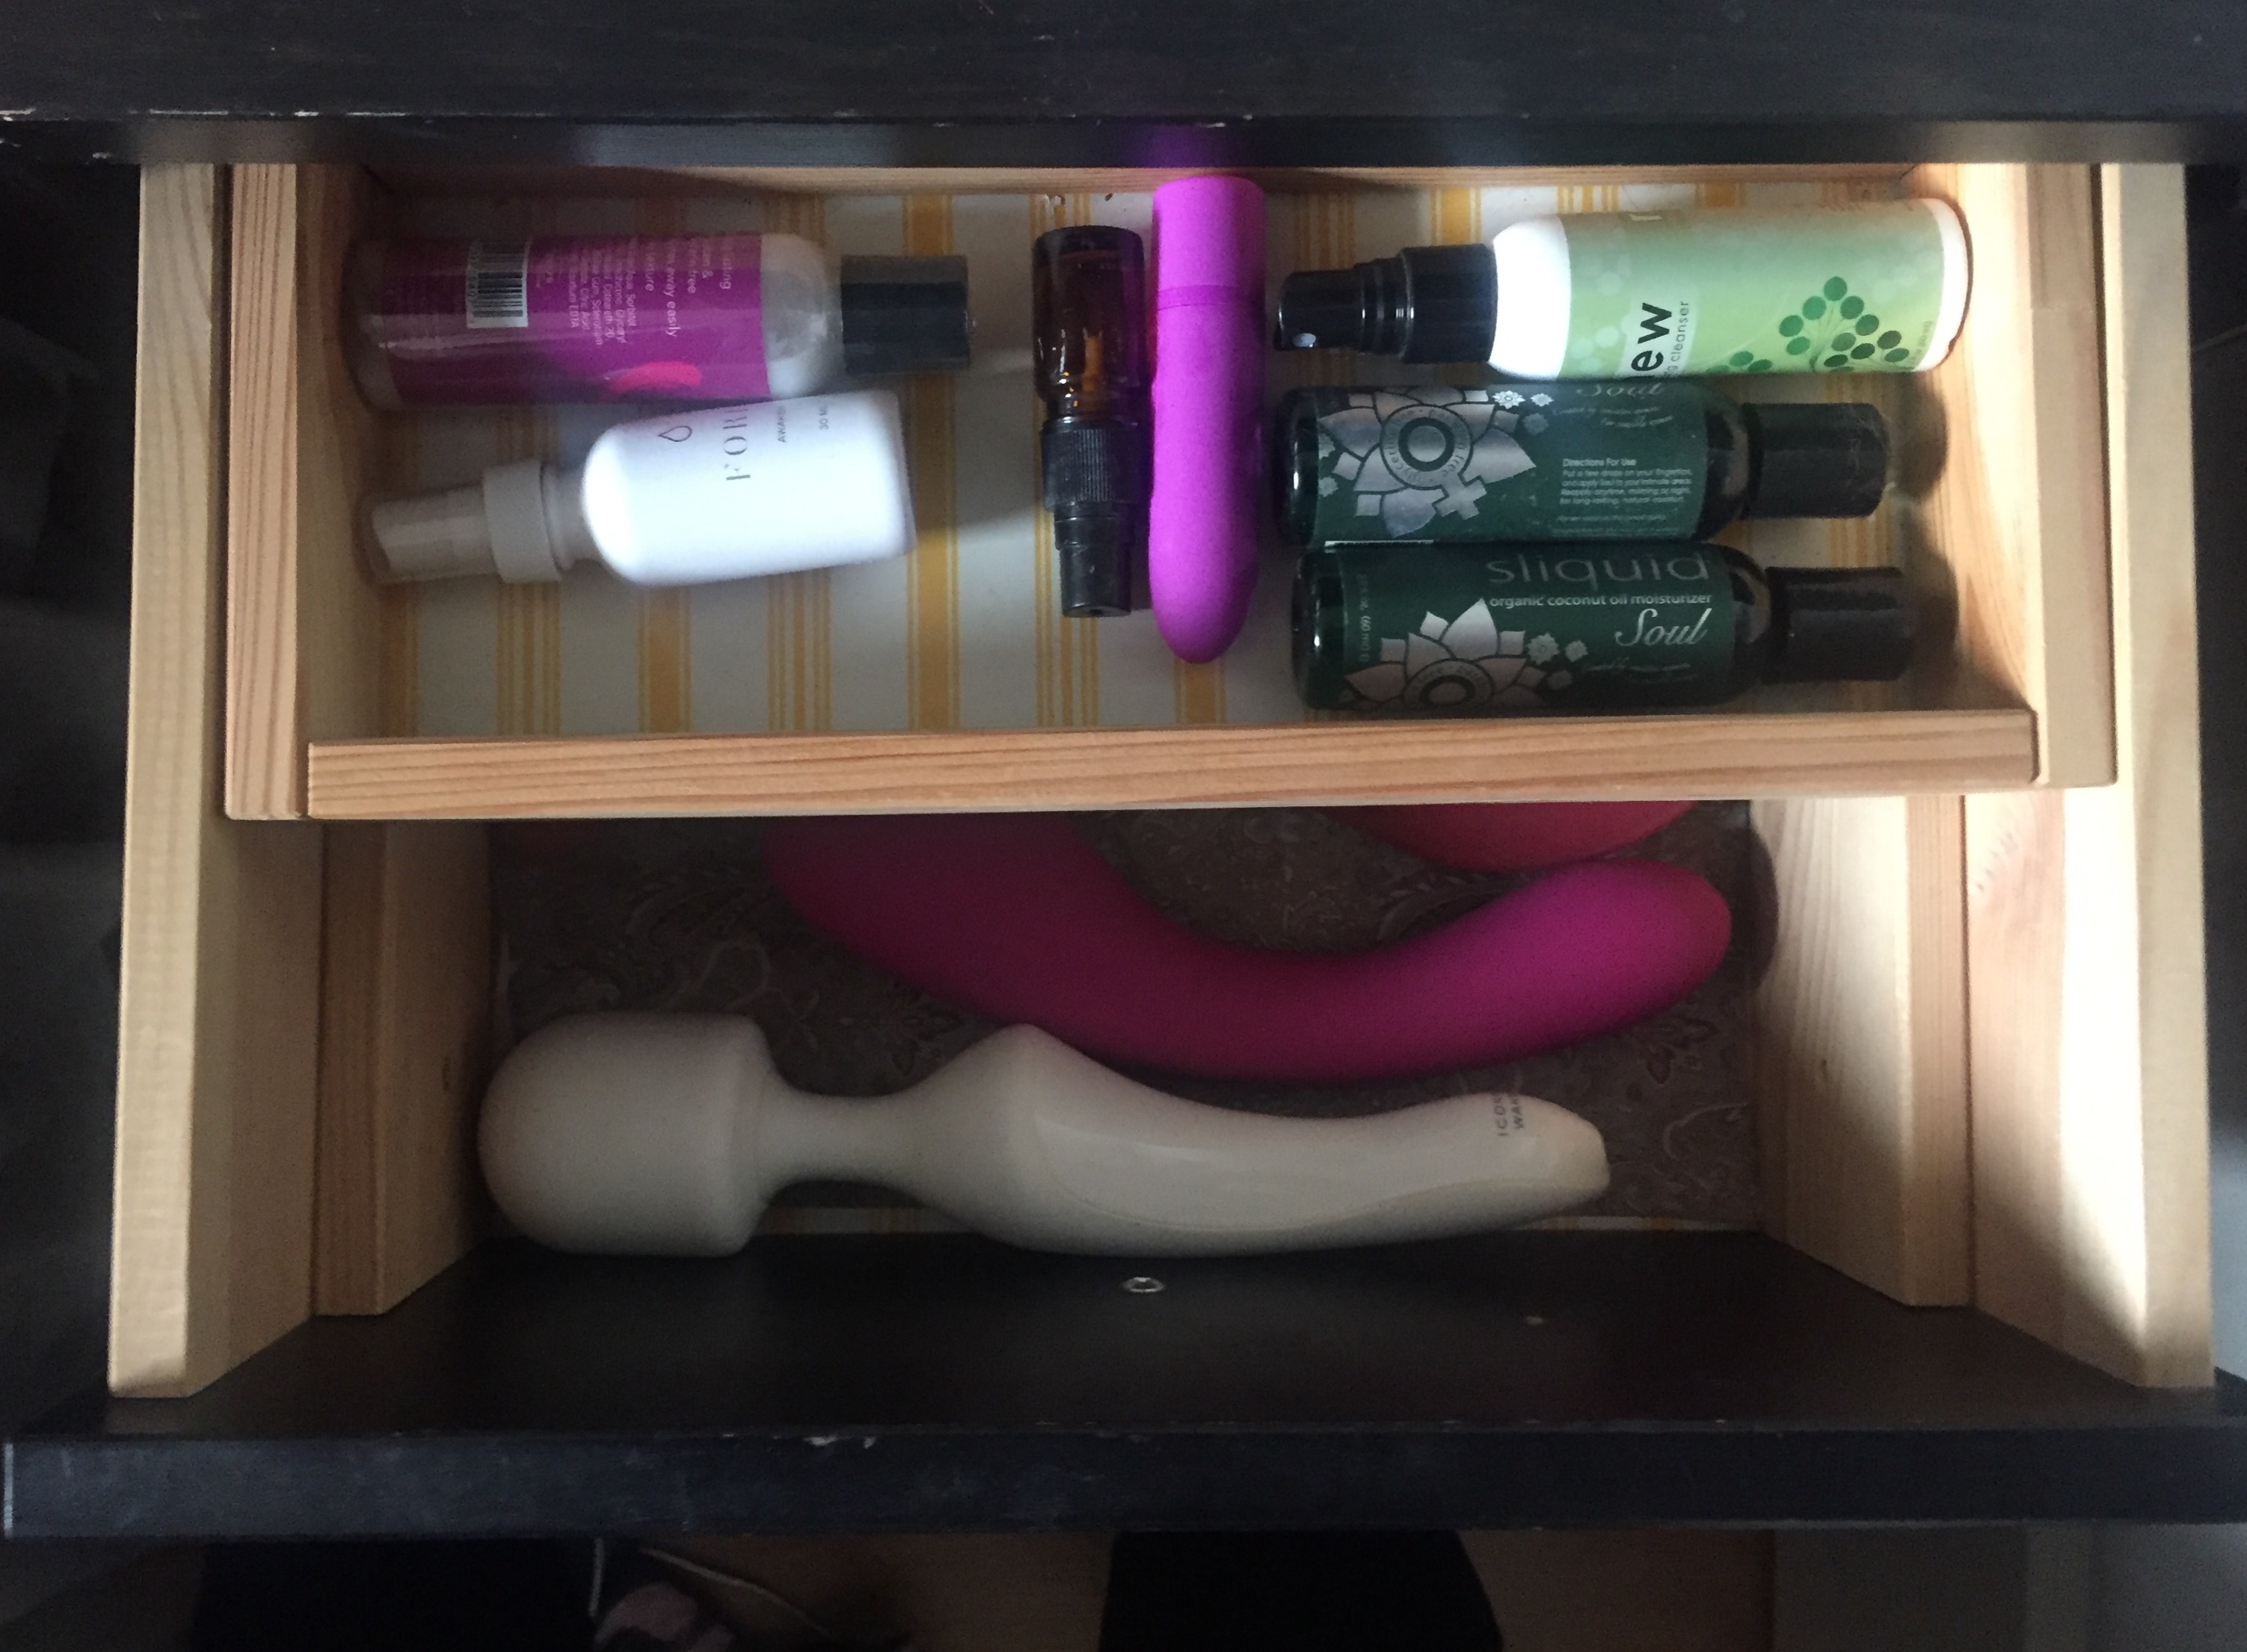 Here I show without shame my sex toy